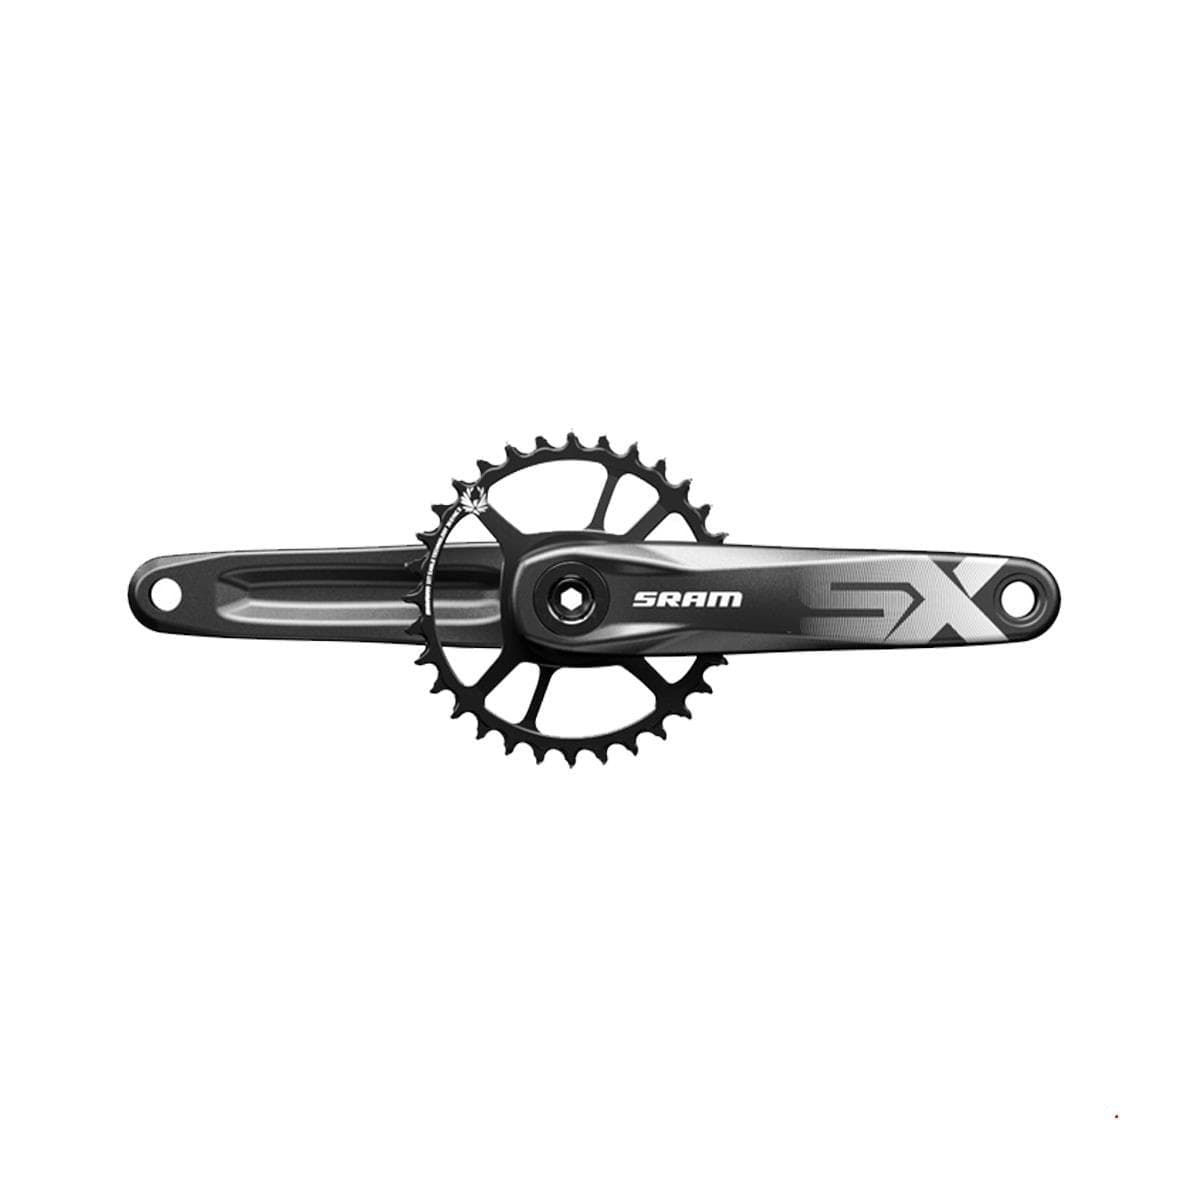 Sram Crankset Sx Eagle Boost 148 Dub 12S With Direct Mount 32T X-Sync 2 Steel Chainring A1: Black 165Mm